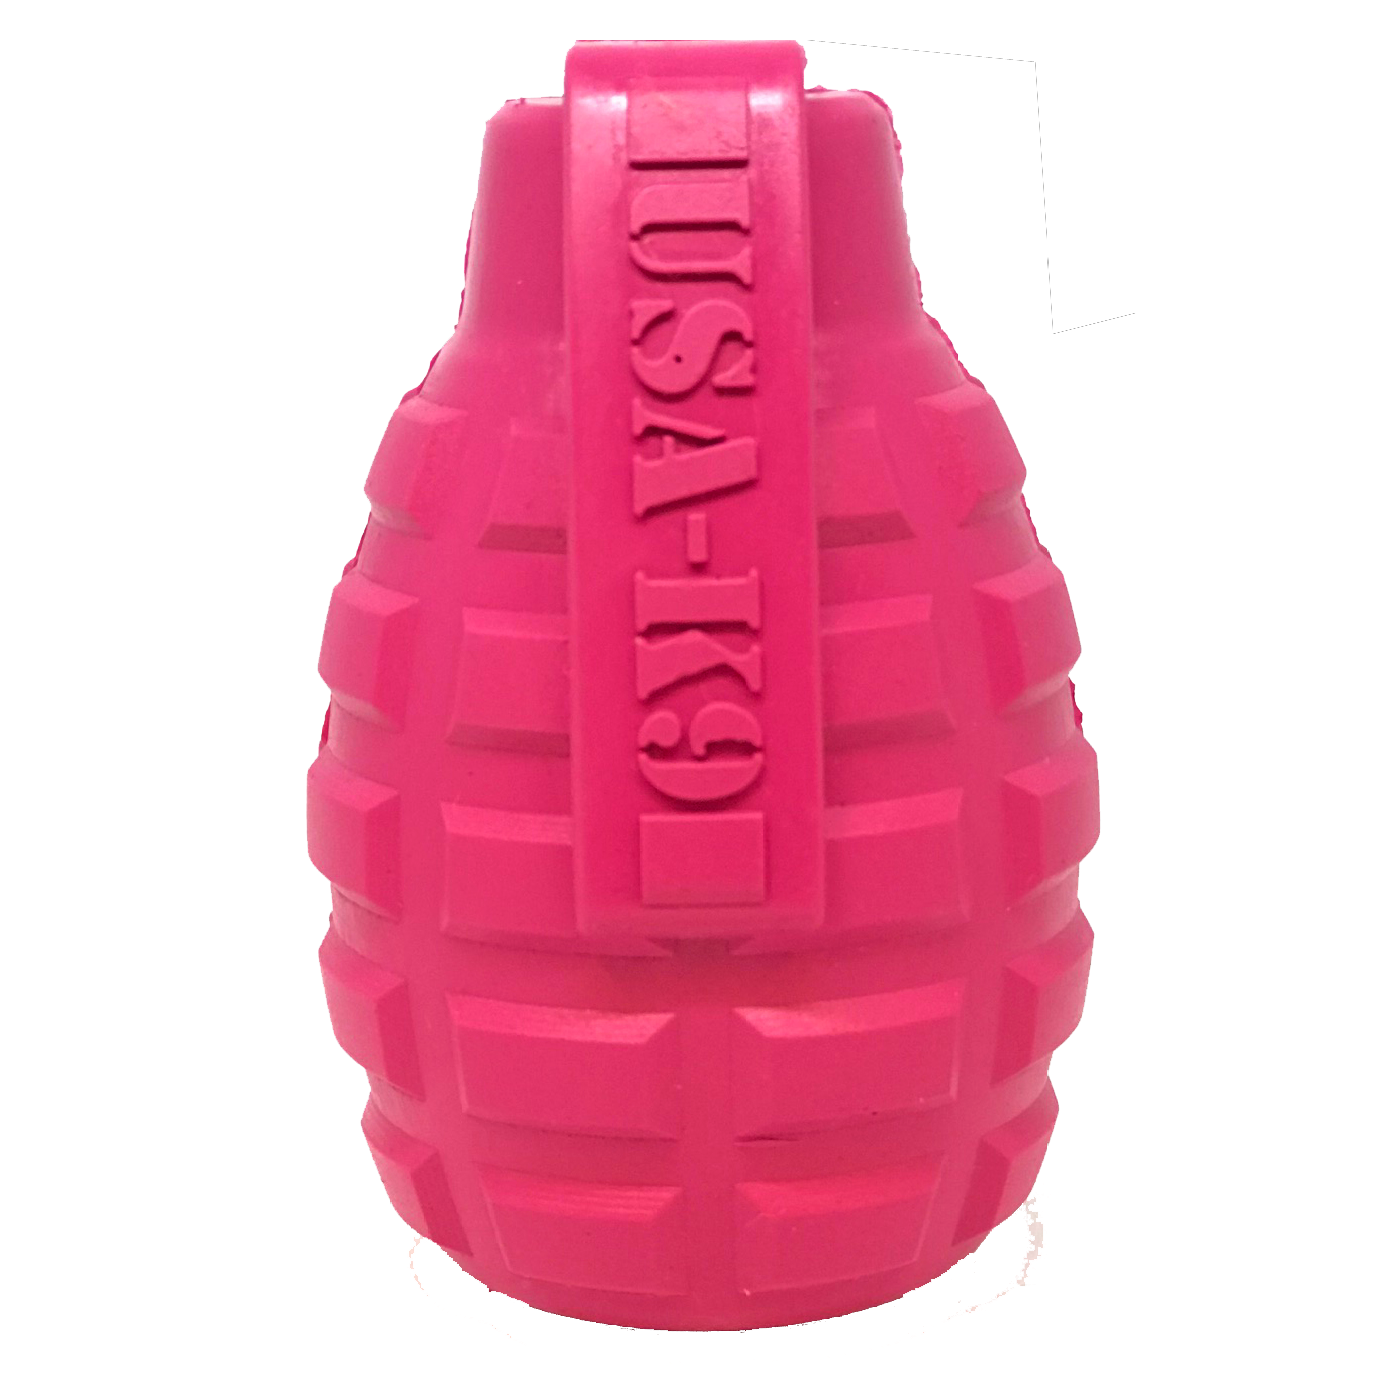 USA-K9 Puppy Grenade  |  Durable Rubber Dog Chew Toy